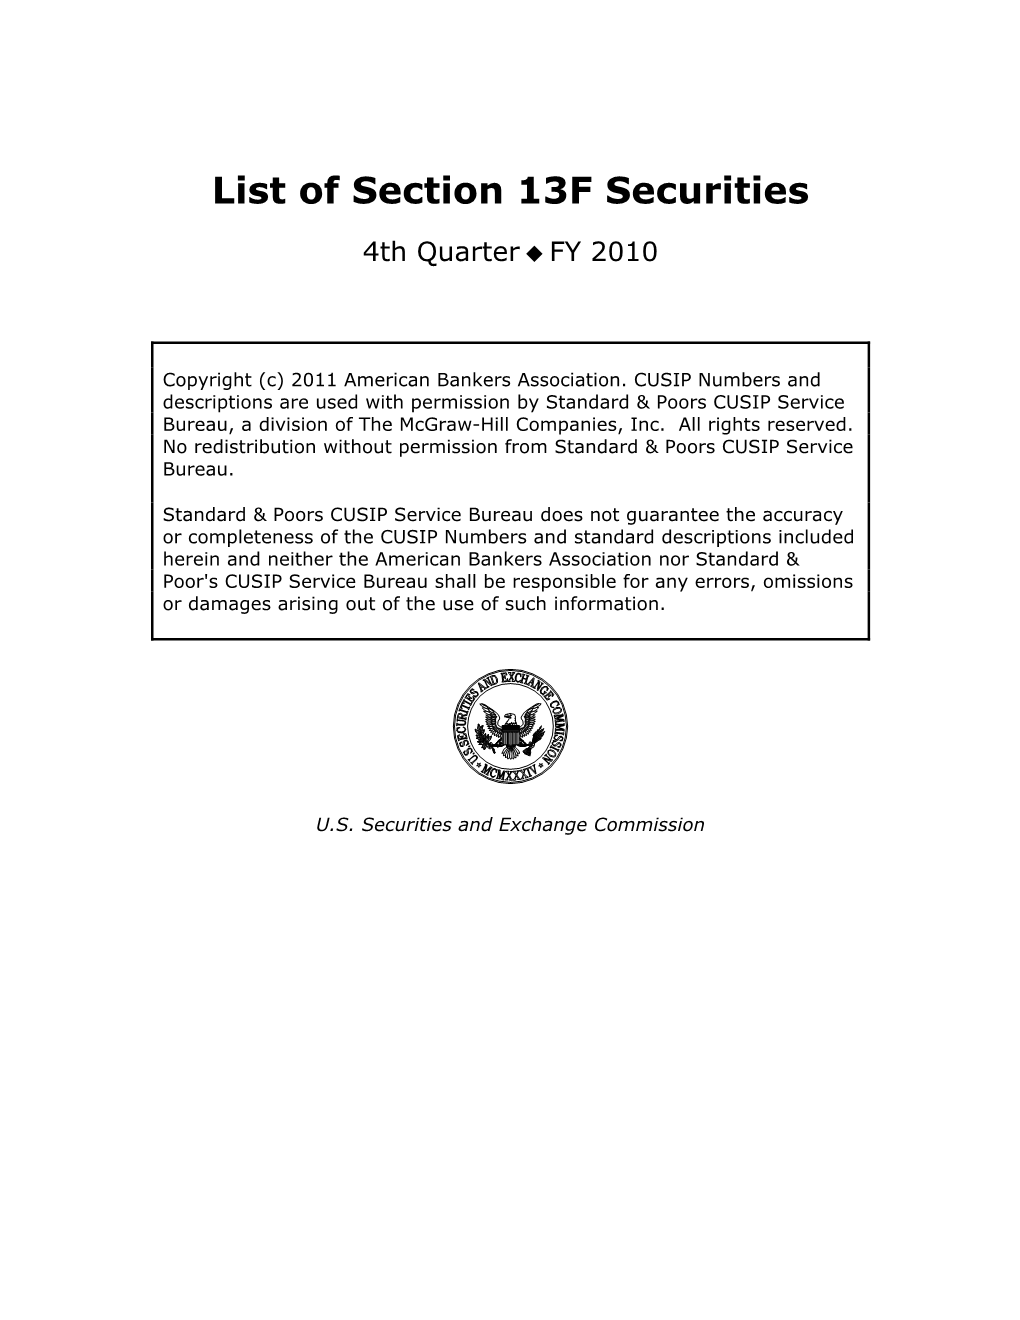 List of Section 13F Securities, Fourth Quarter, 2010